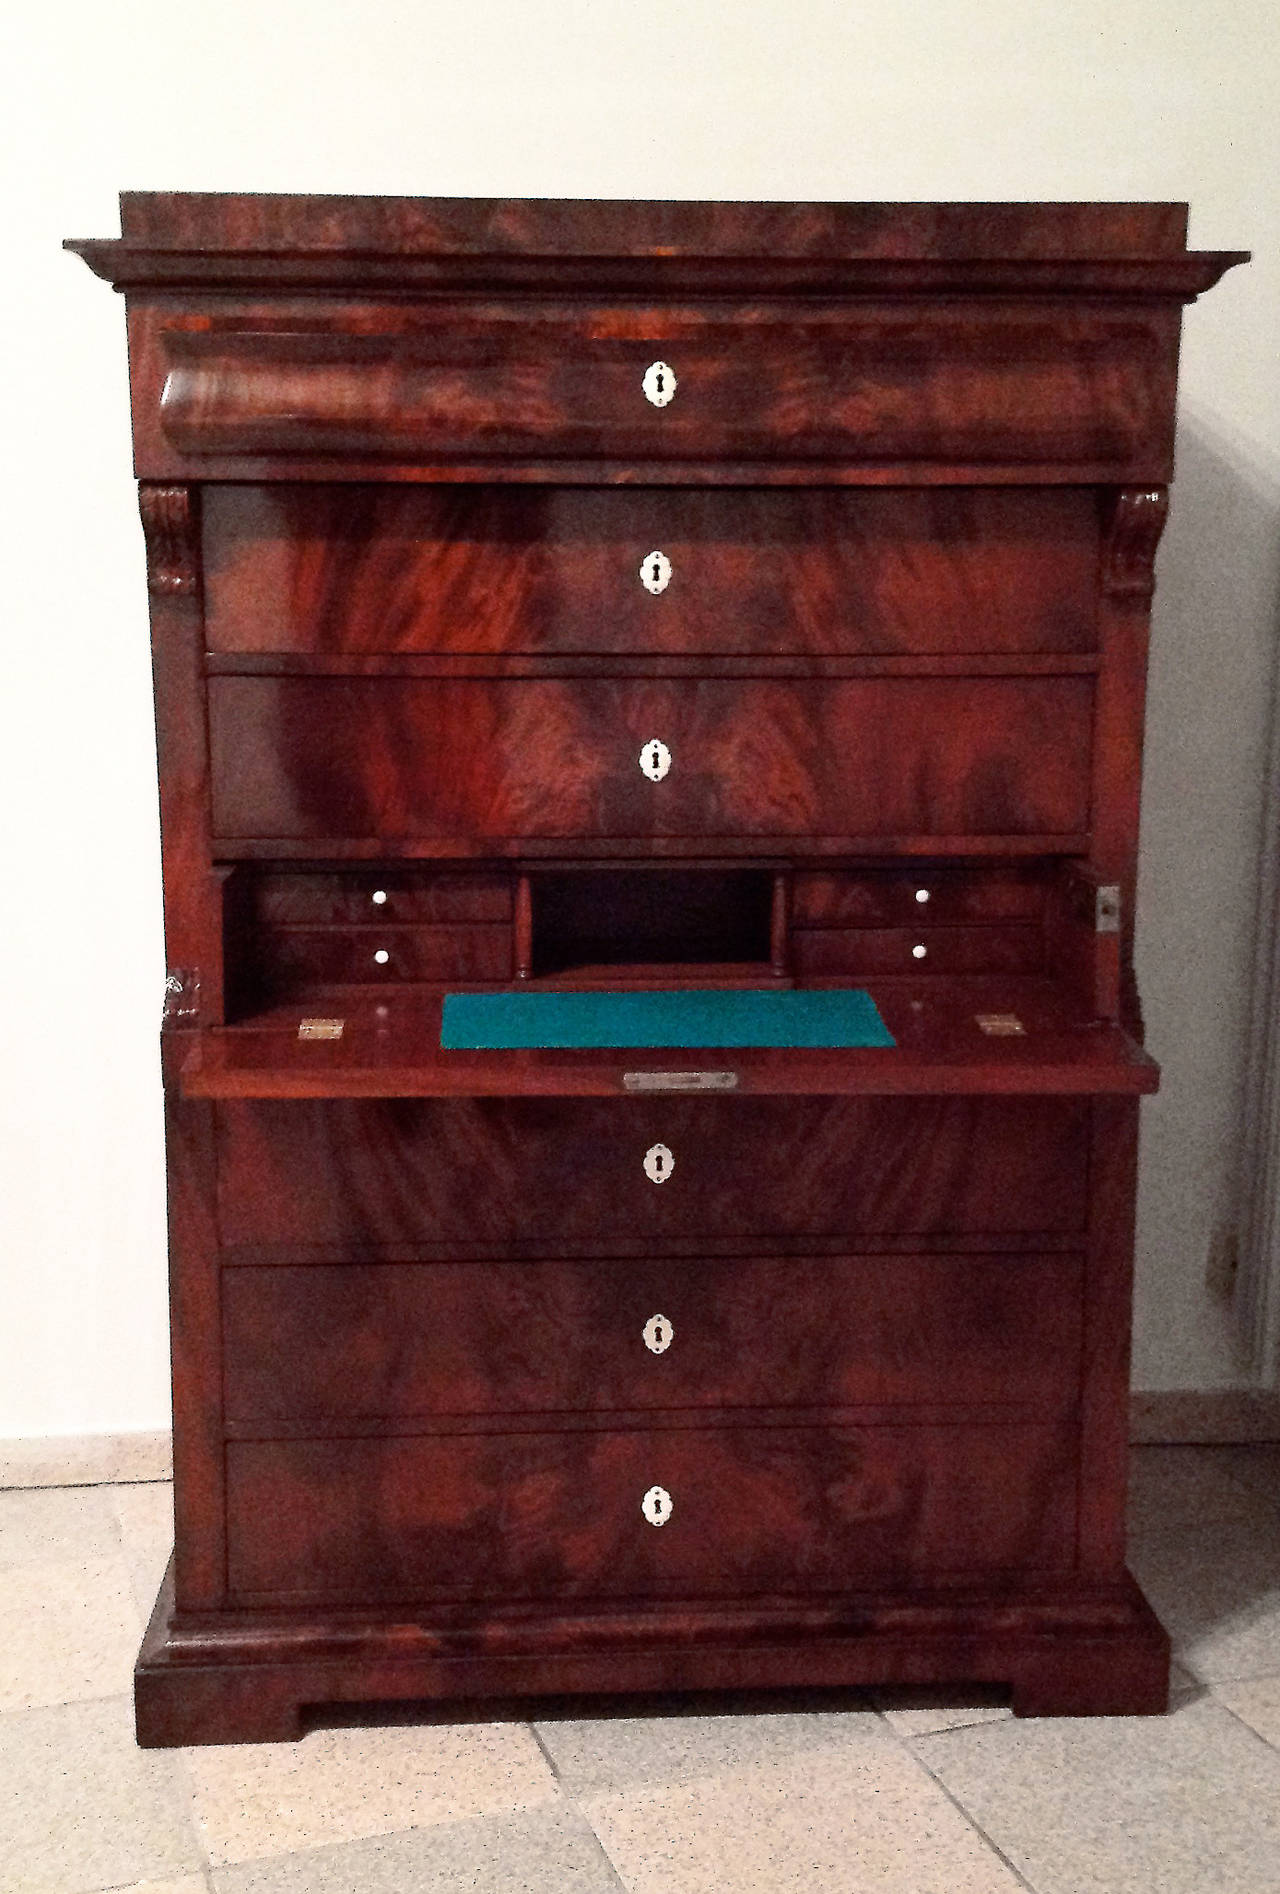 Biedermeier mahogany chiffonier with writing drawer northern Europe, circa 1840
fully restored with shellac finish. 

 